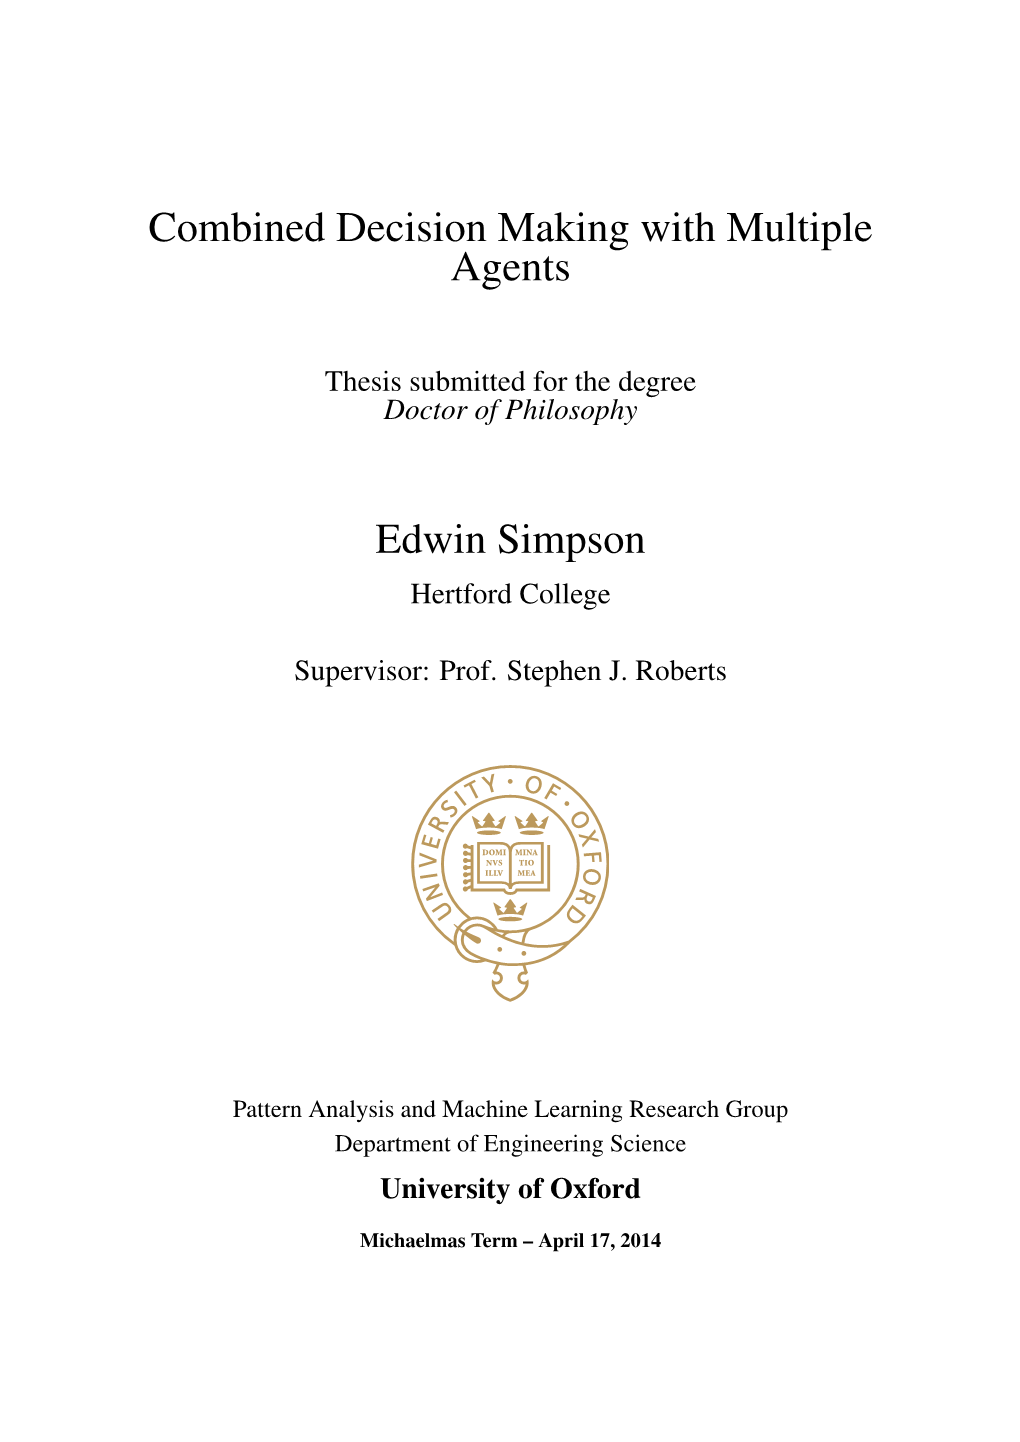 Combined Decision Making with Multiple Agents Edwin Simpson